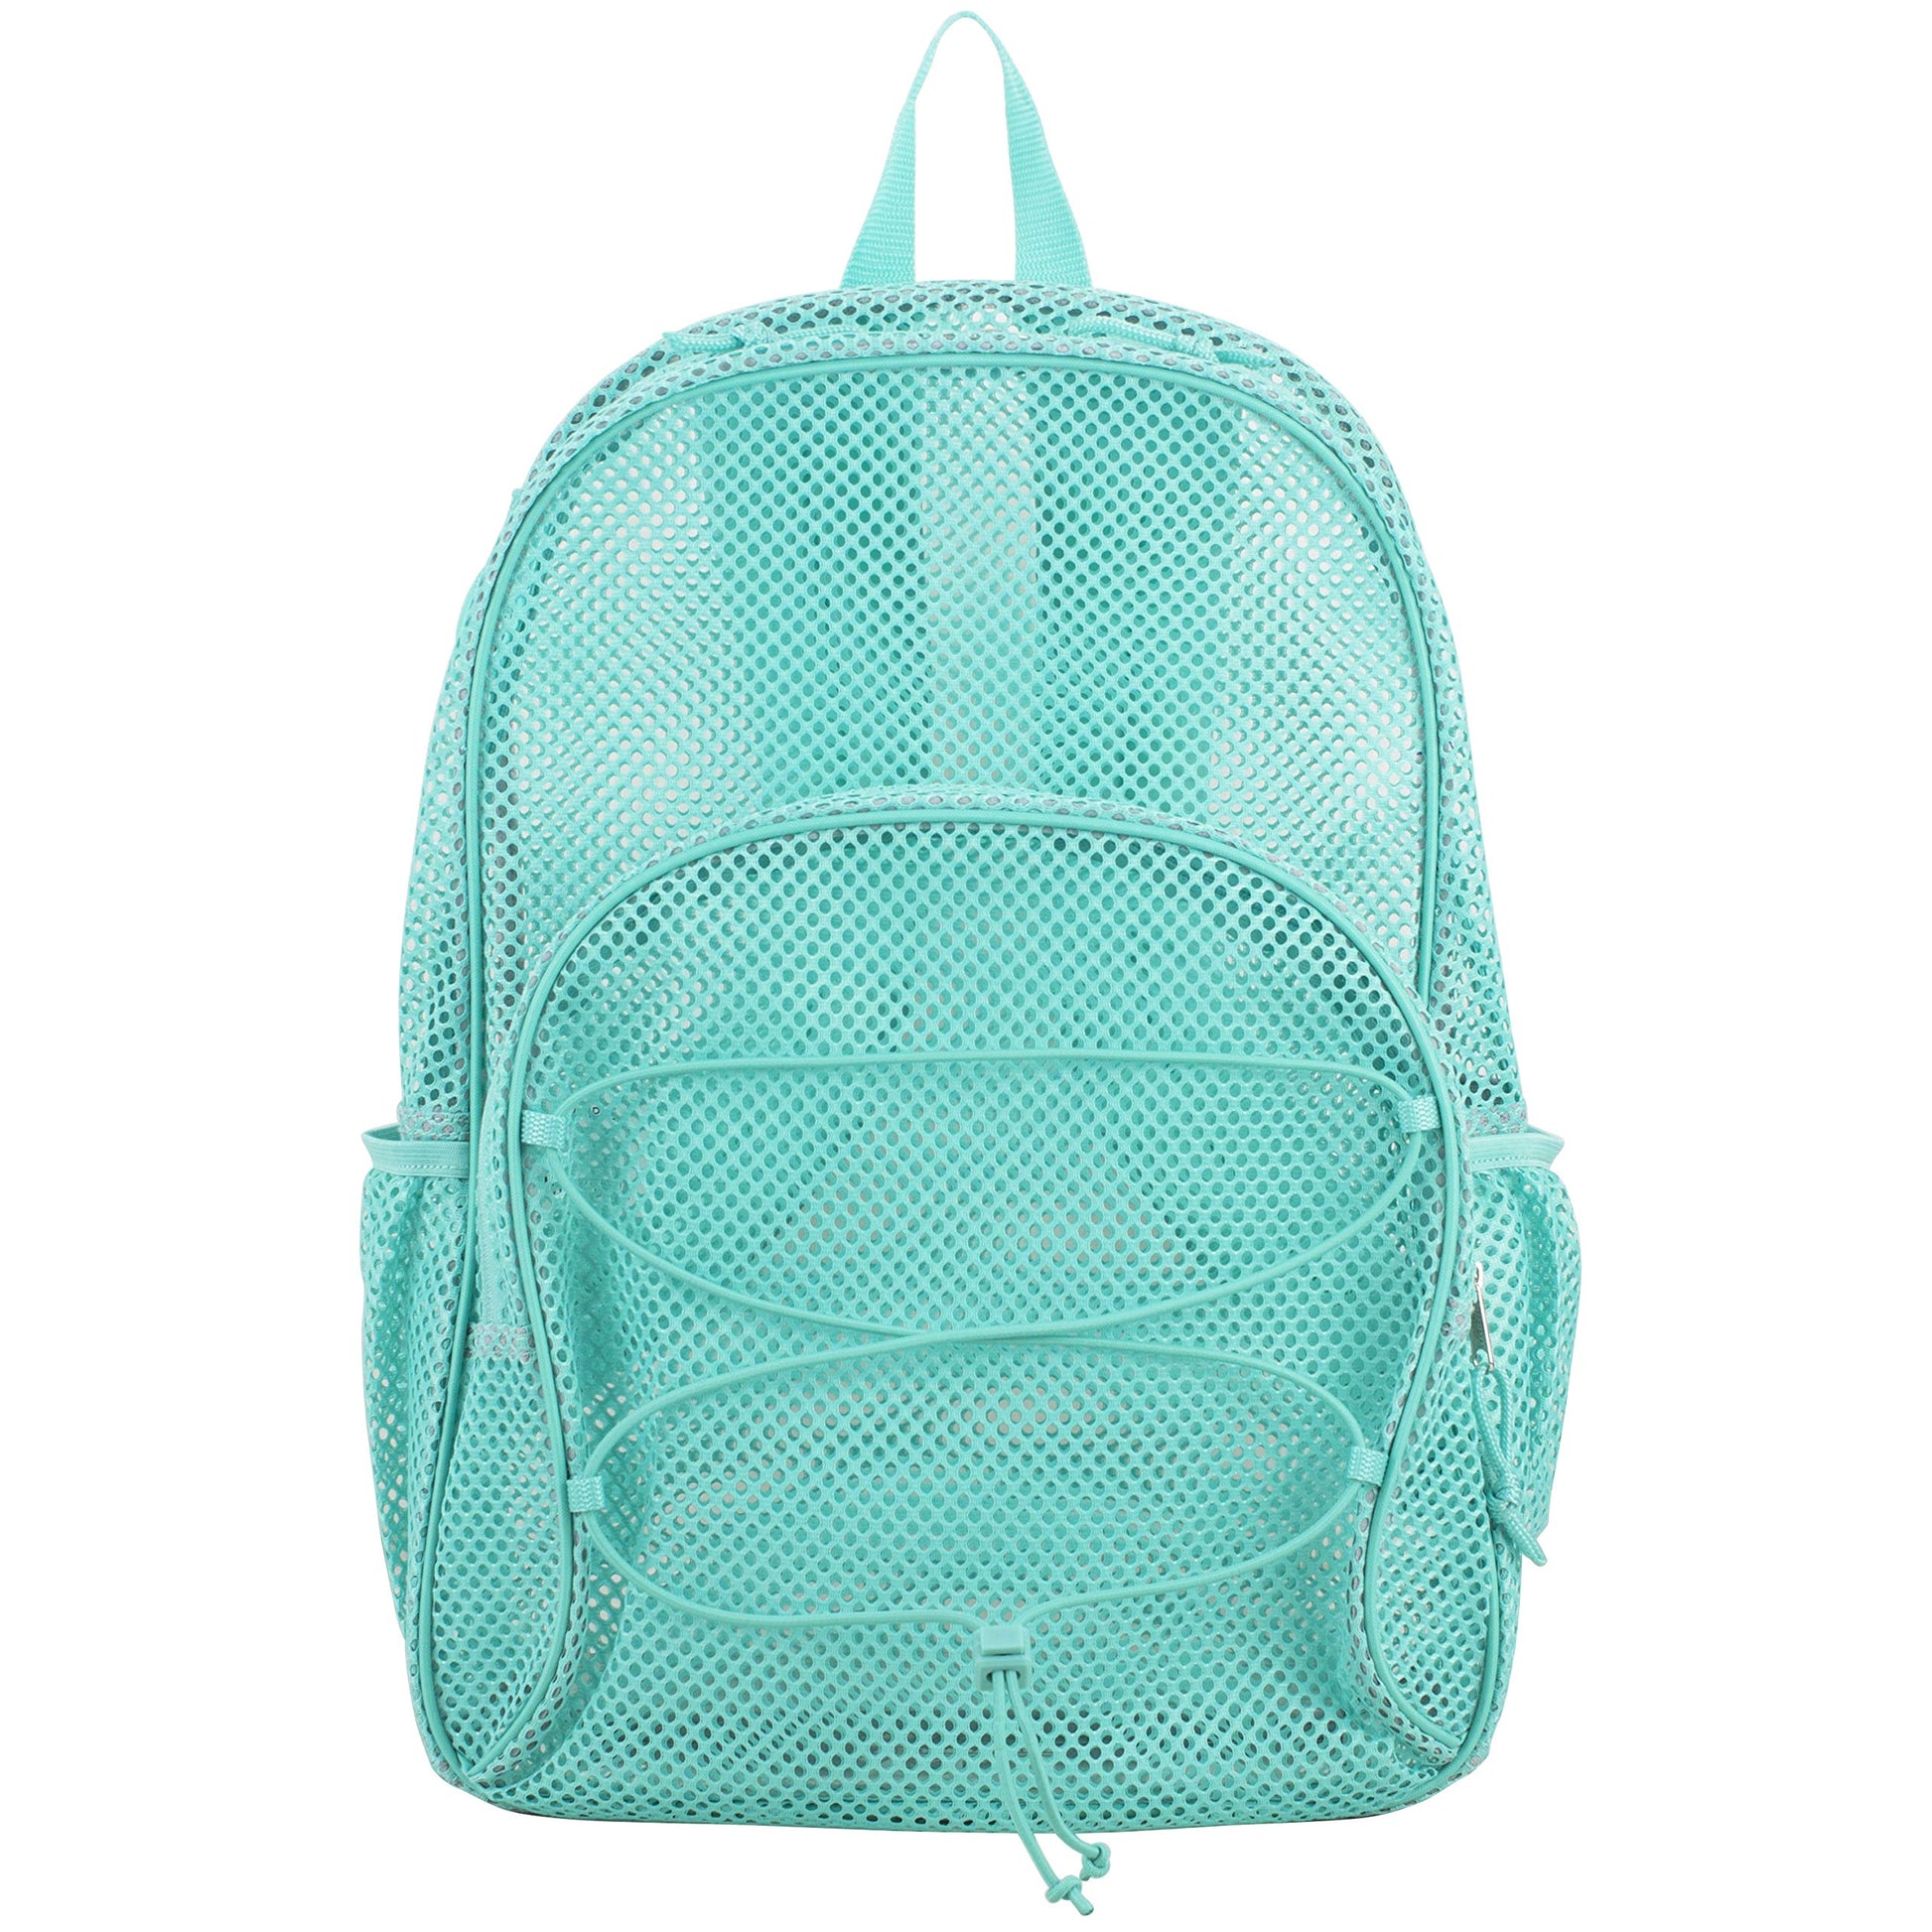 Eastsport Heavy Duty, Mesh, See-Through, Semi-Transparent Backpack with Bungee and Comfortable Padded Straps